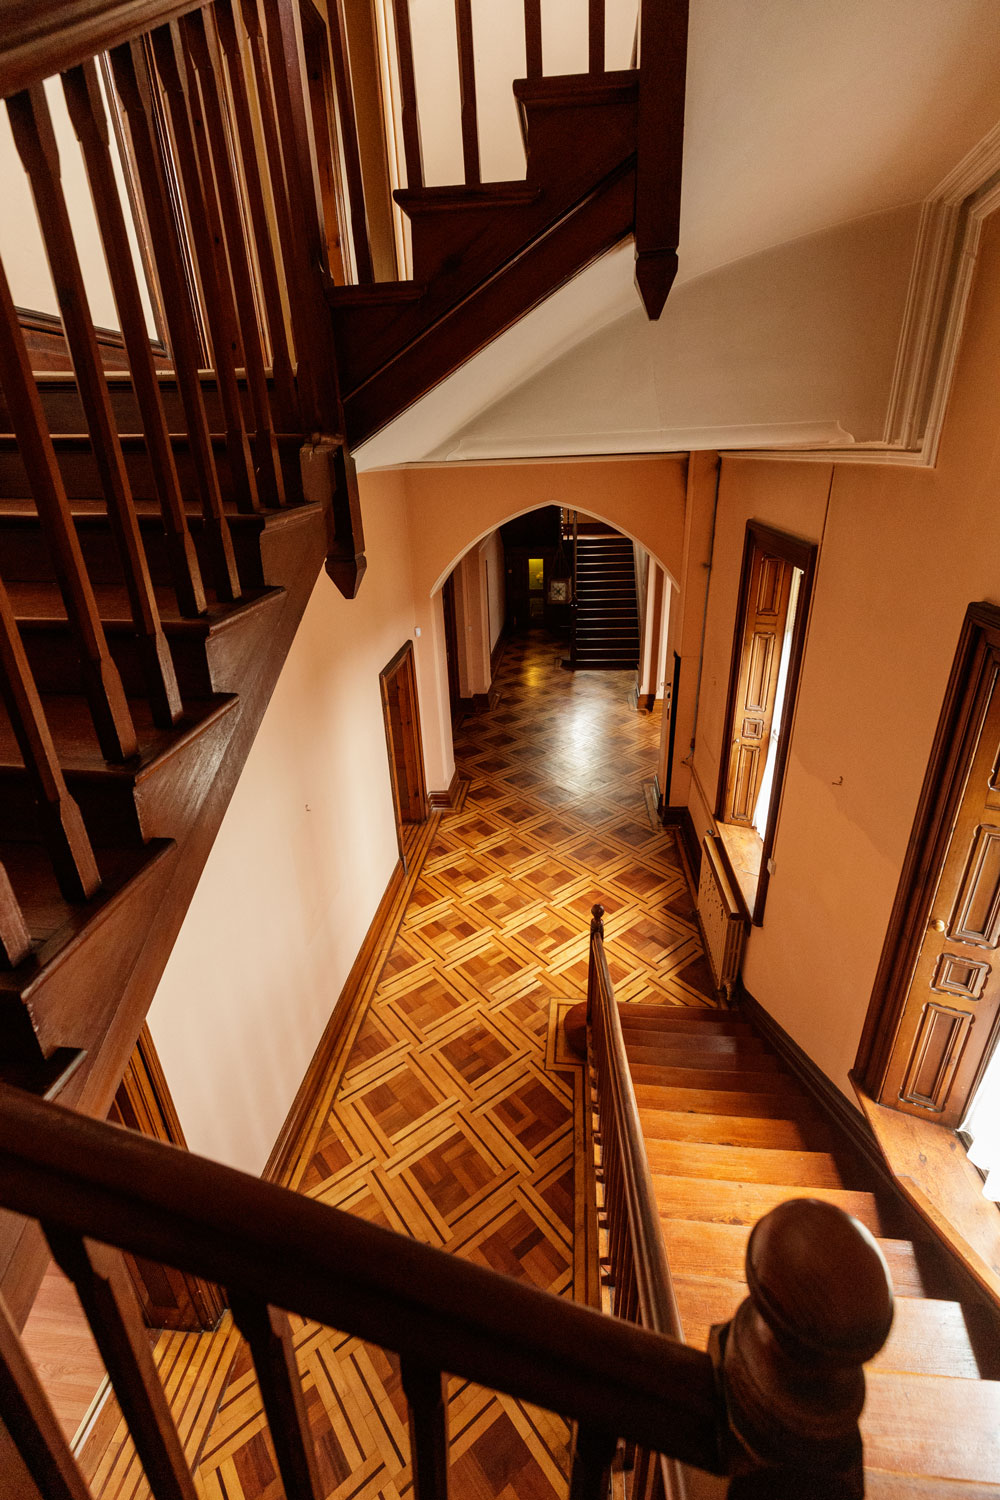 Wooden stairs lead down to a hallway with an exquisite parquet floor and large windows with broad sills and wood shutters inside.